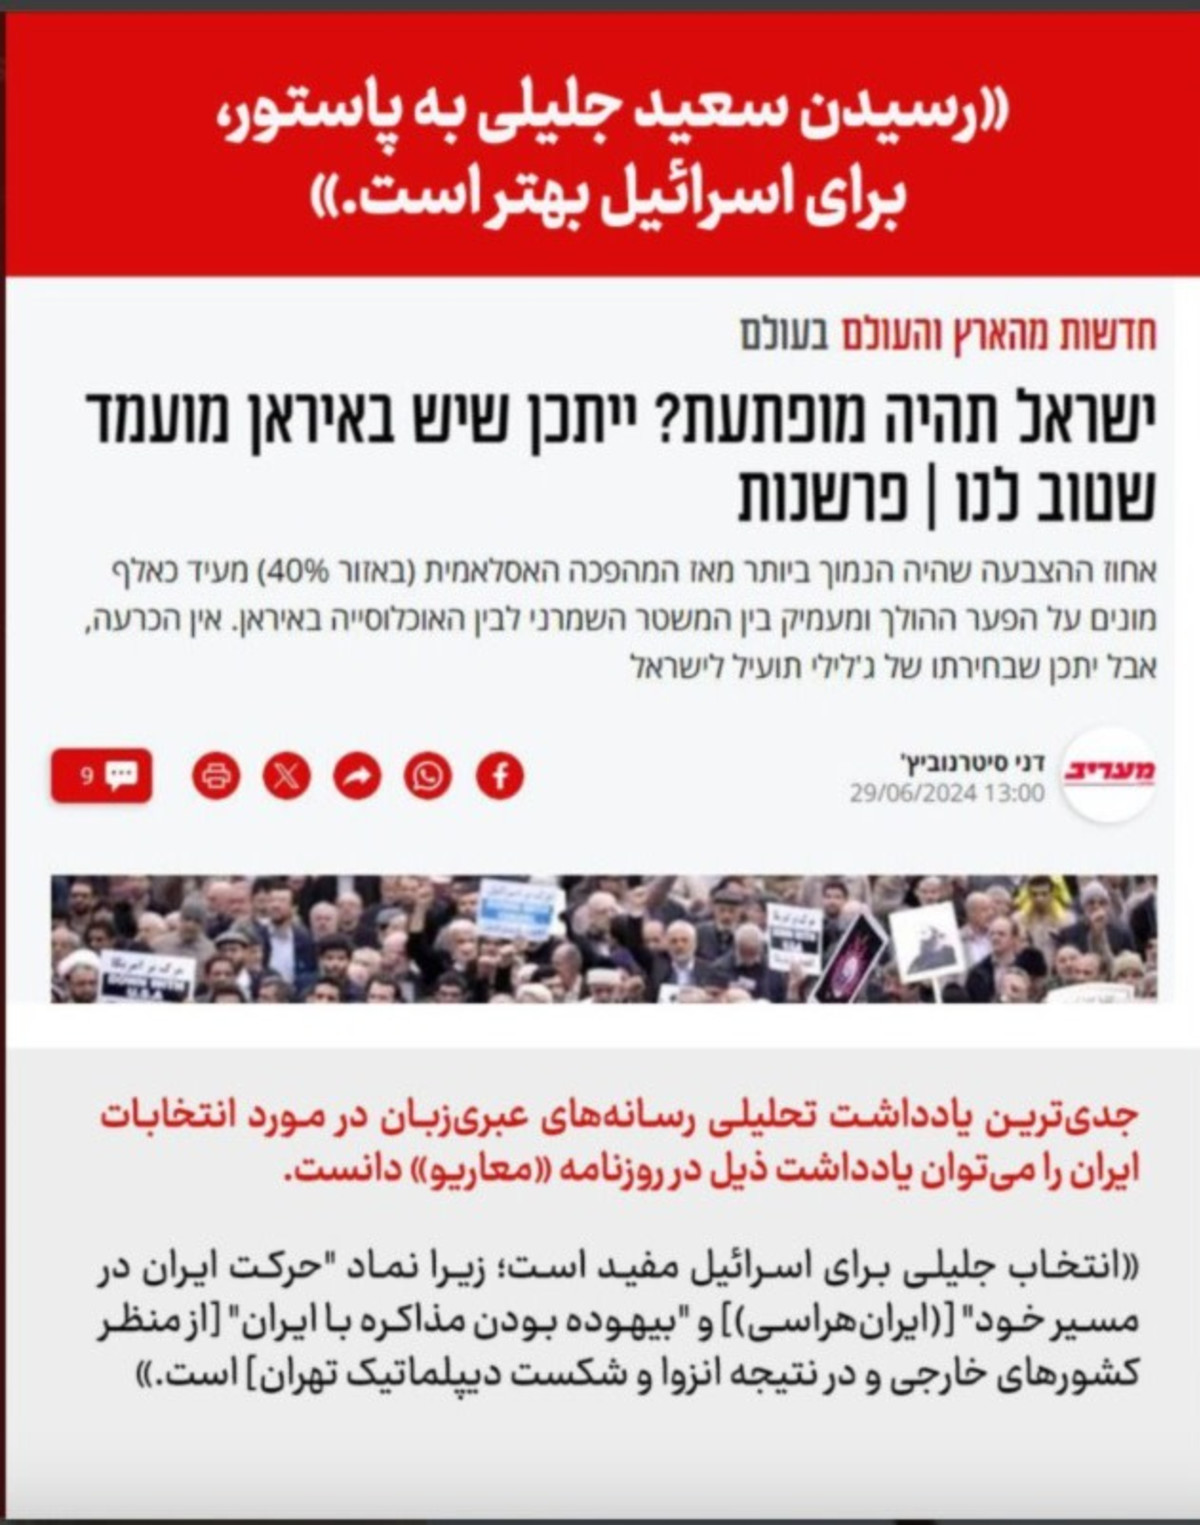 Iran uses Maariv's article to bash the presidential candidate